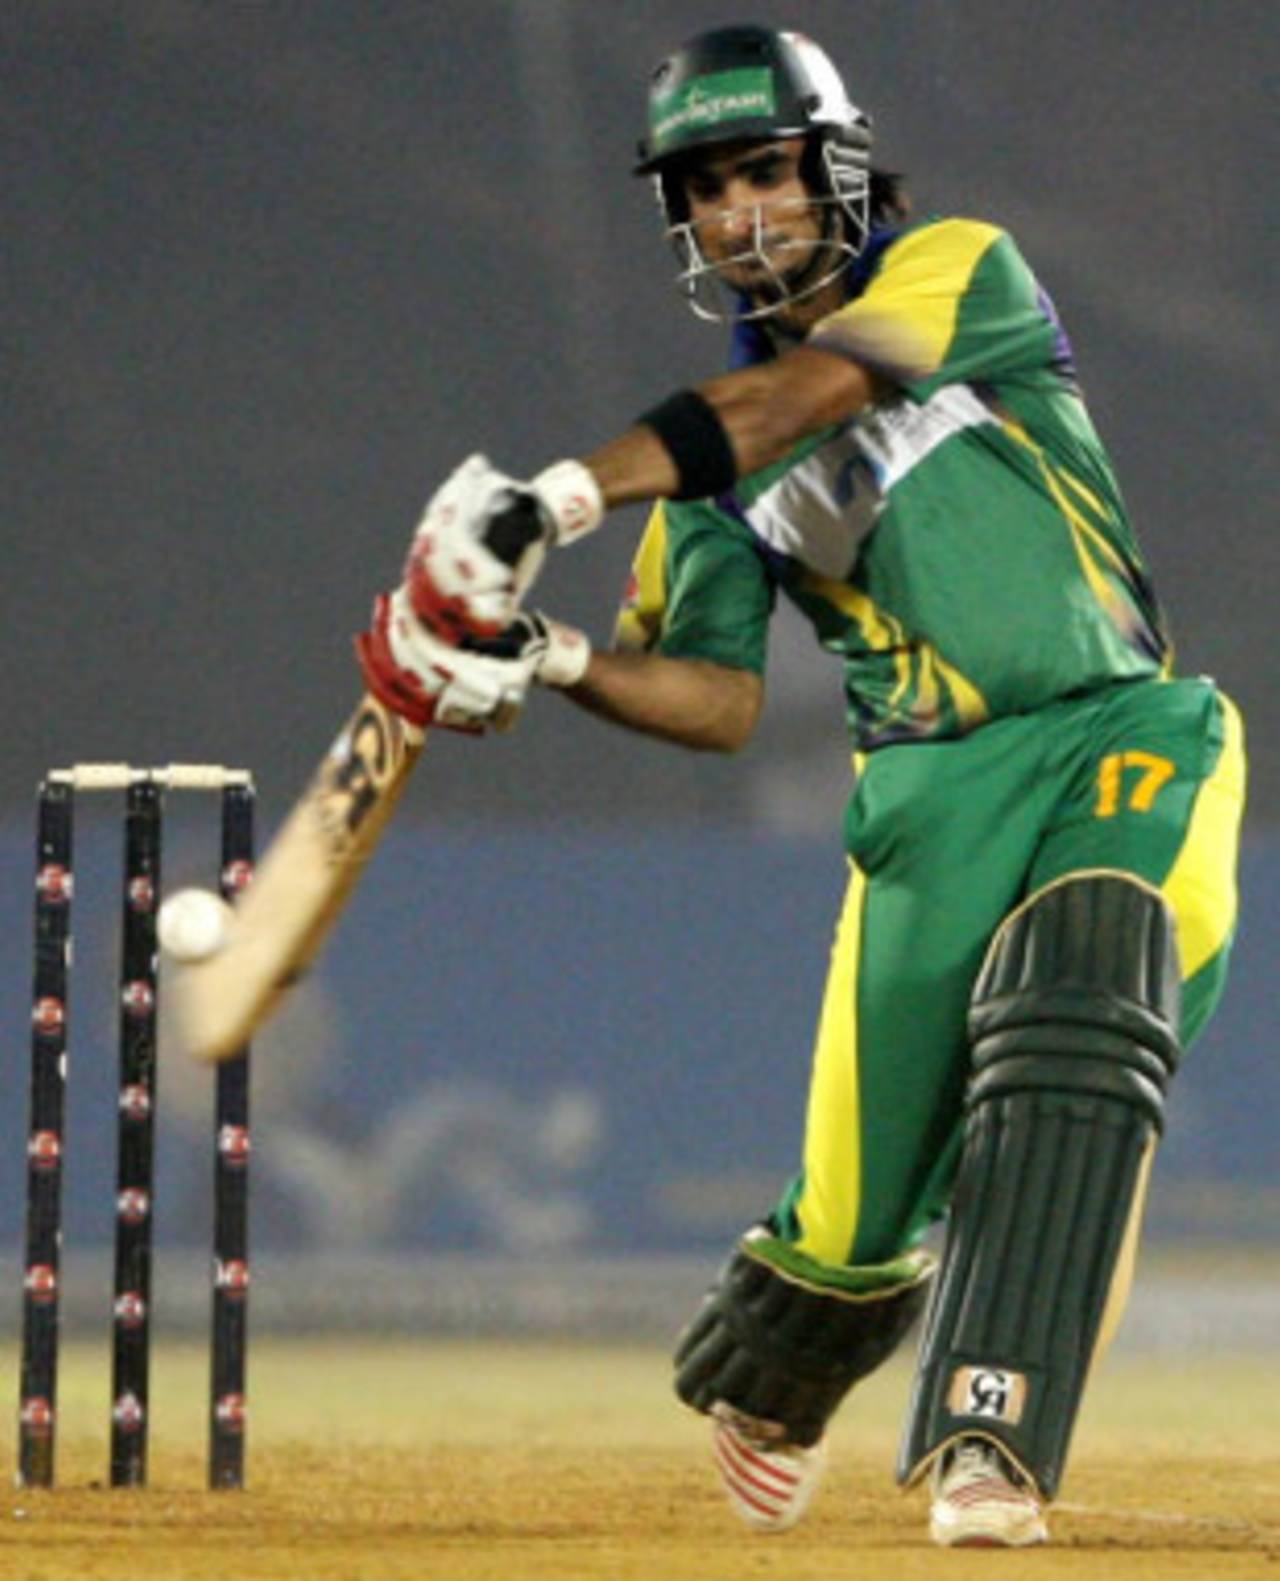 It is not known whether Imran Nazir and his two ICL team-mates have been released from their contracts&nbsp;&nbsp;&bull;&nbsp;&nbsp;ICL